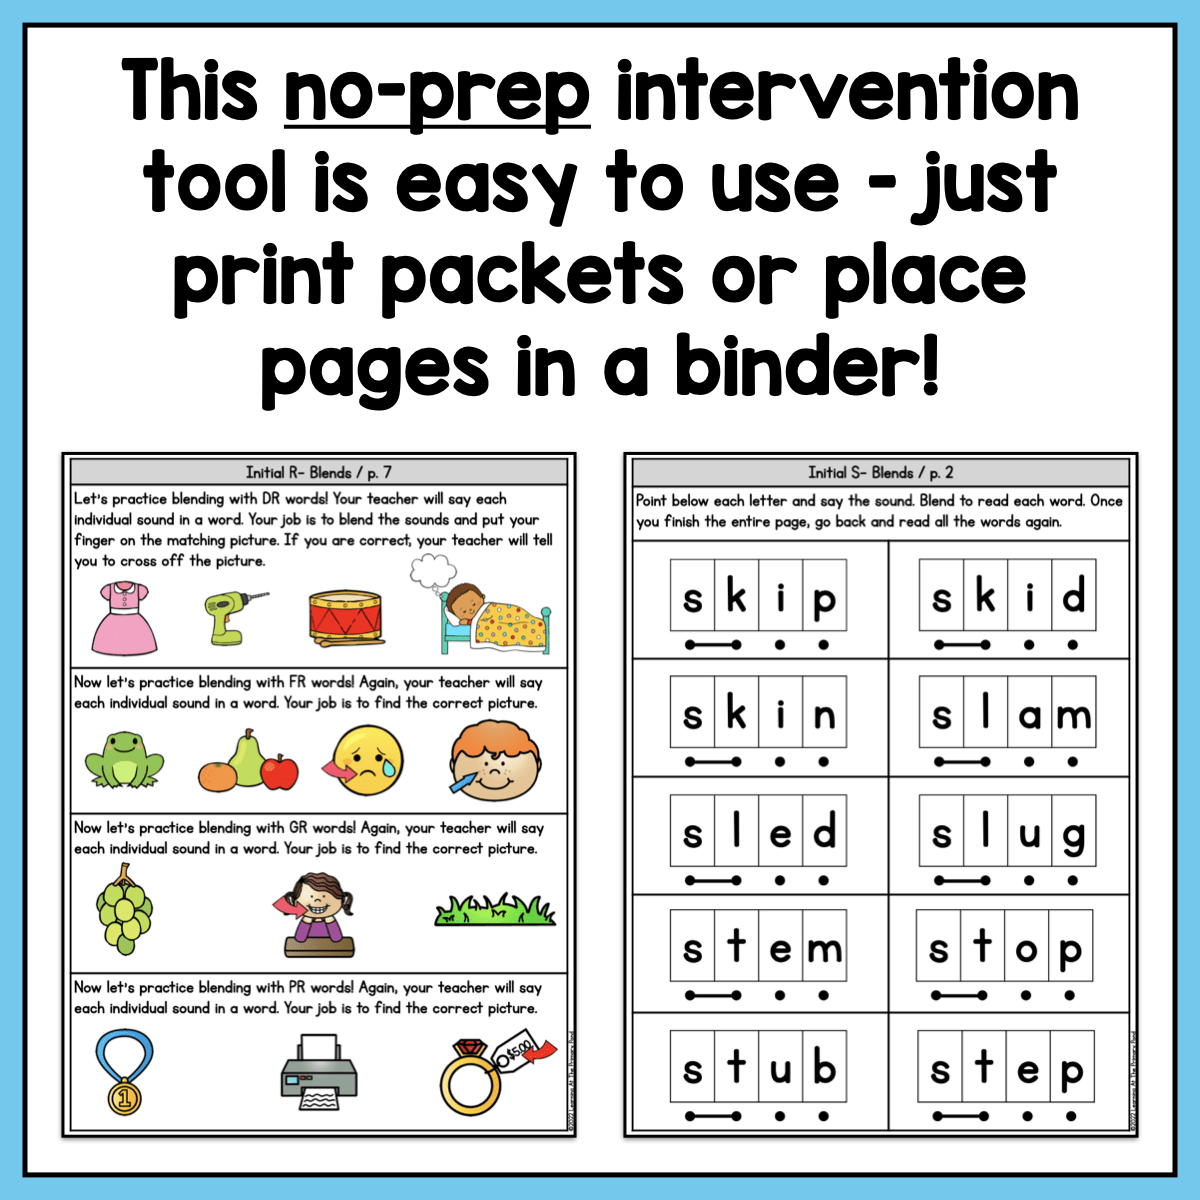 Consonant Blends & Glued Sounds Intervention Pack | No-Prep, Phonics-Based Reading Intervention - learning-at-the-primary-pond